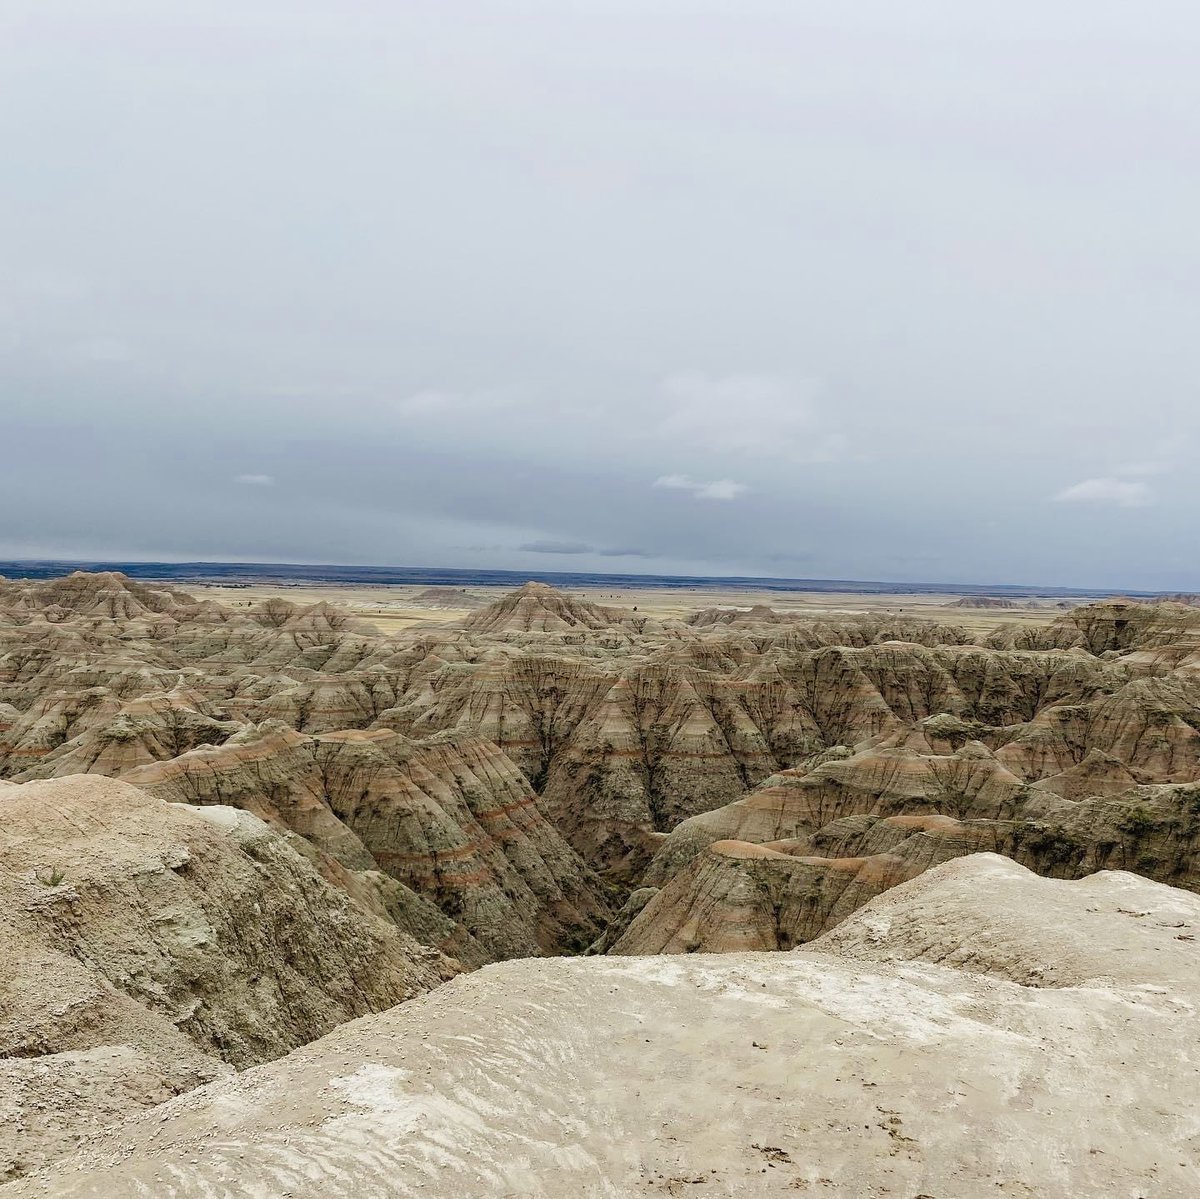 Happy #NationalParksWeek ! I have been lucky to go to 4 national parks . Yellowstone, Teddy Roosevelt, National Park , Wind Cave and the Badlands . I hope in the future to knock a few more off my list.